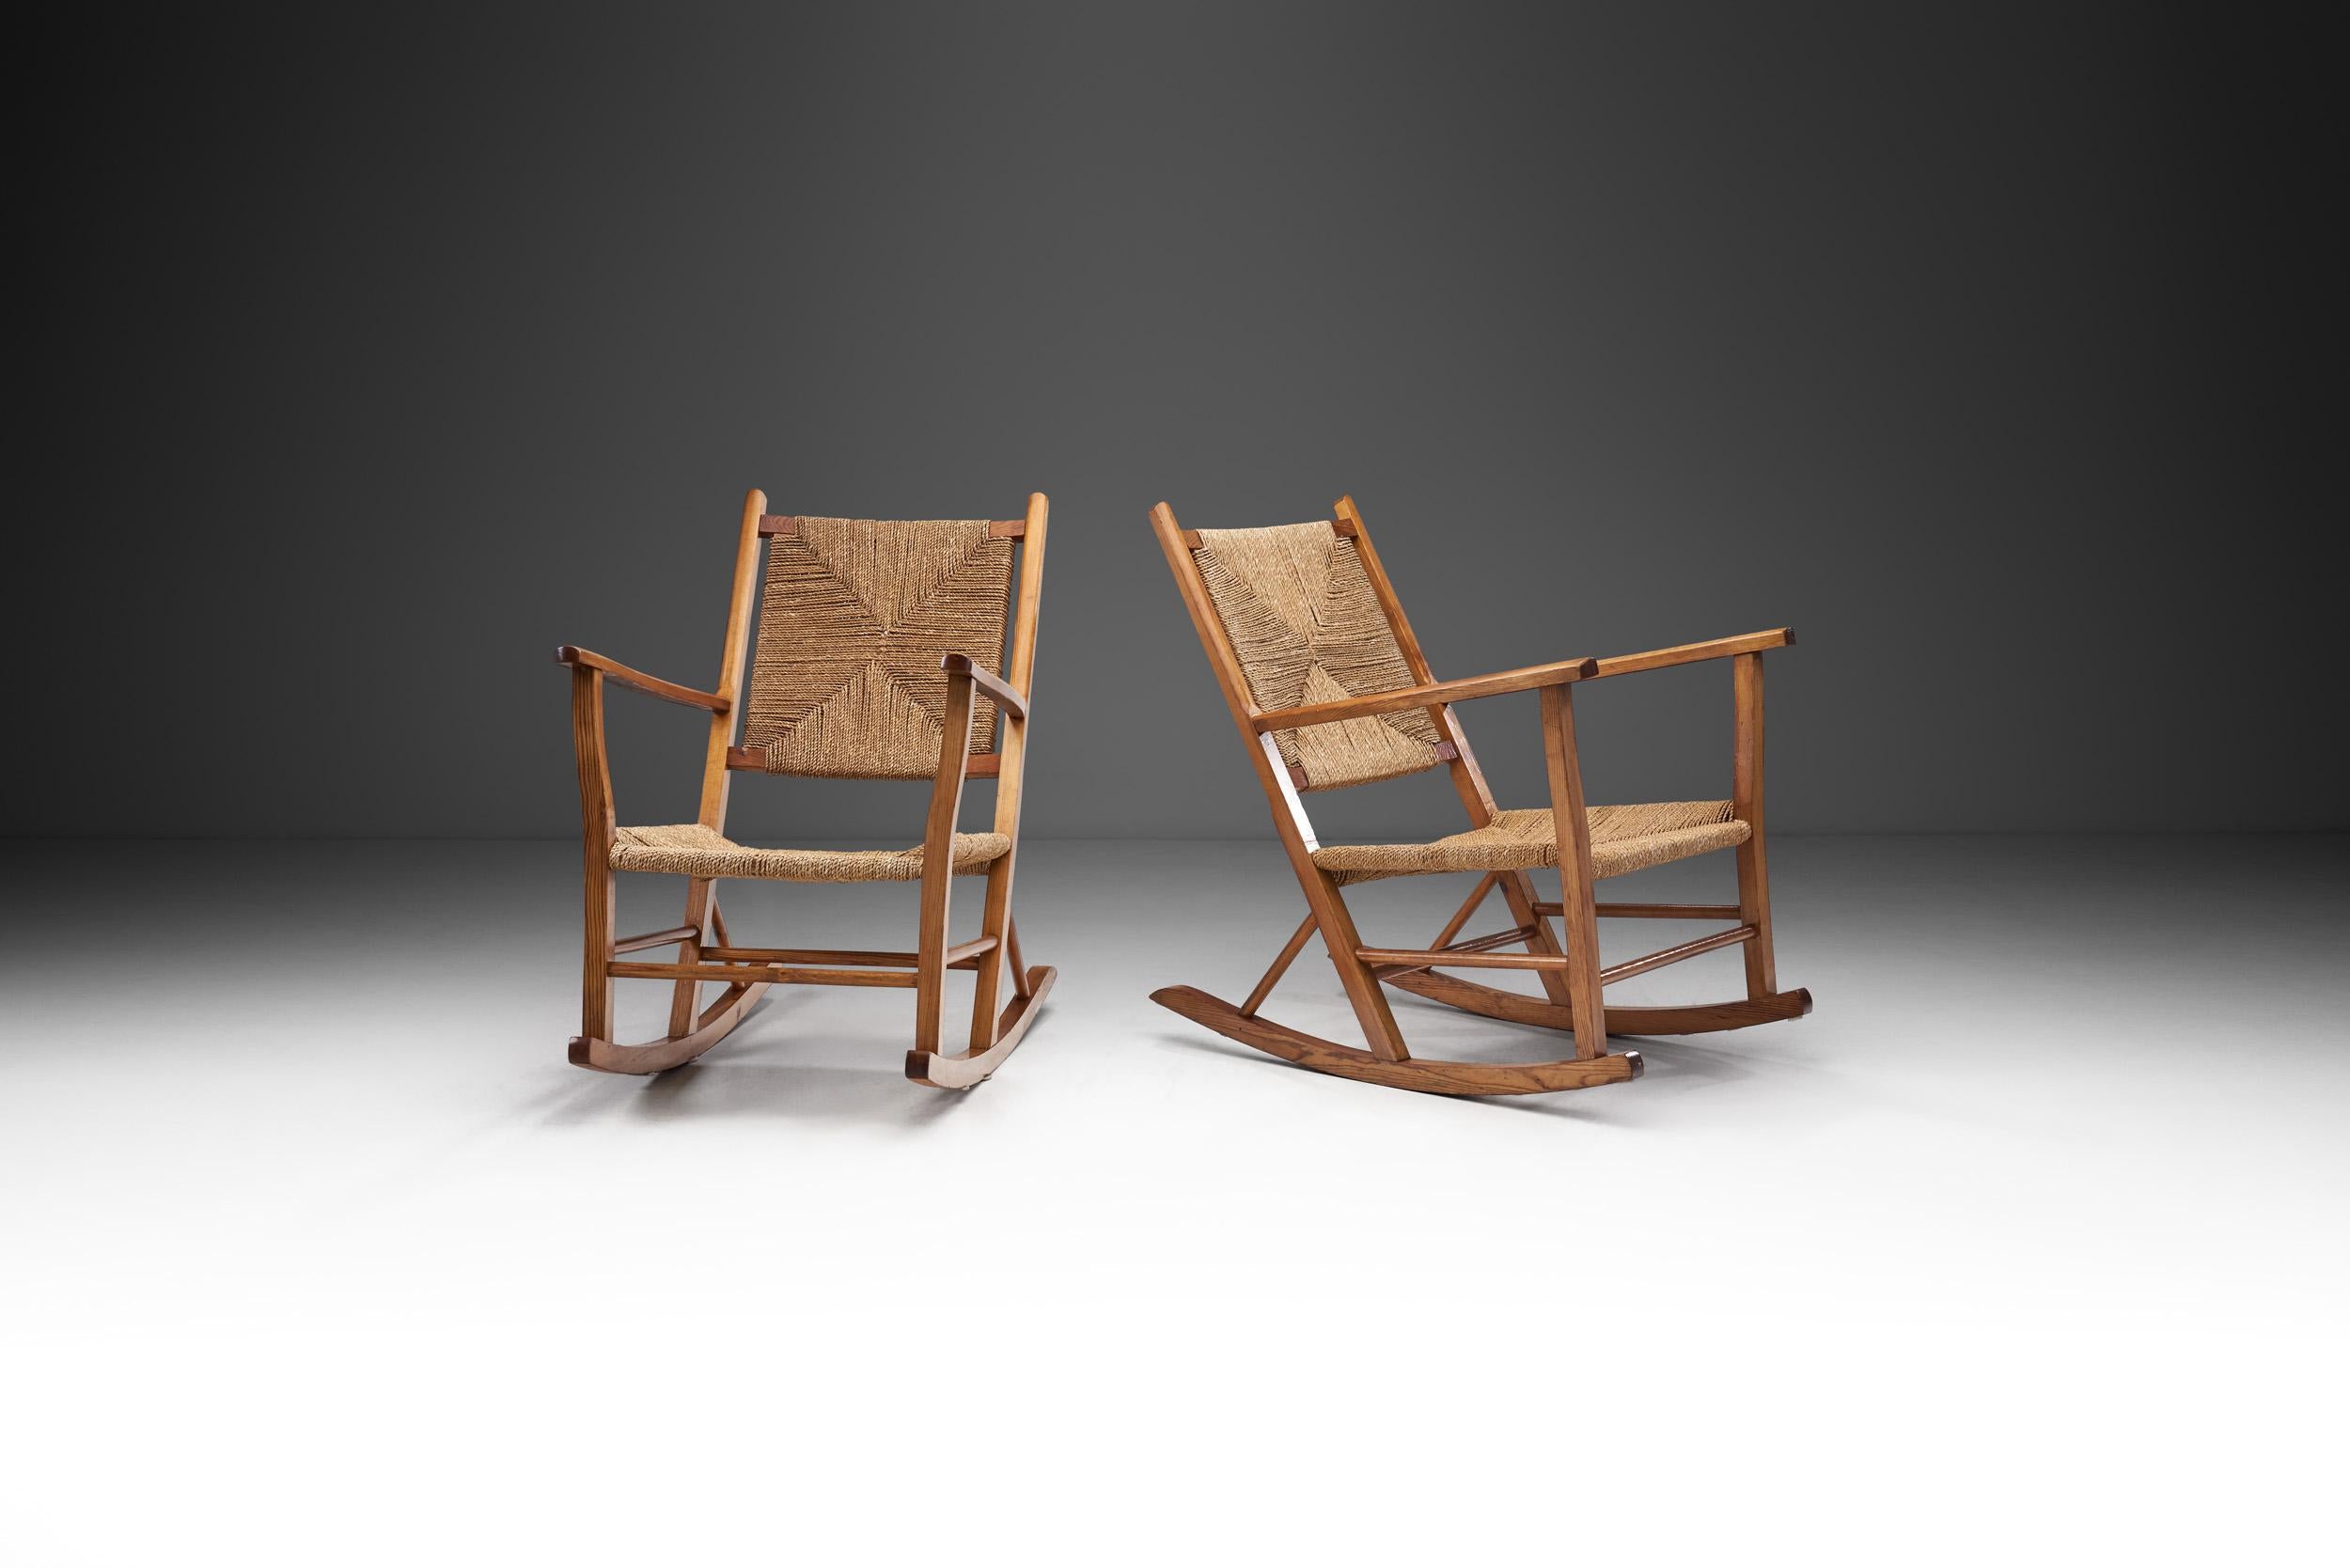 Mid-20th Century Norwegian Wood and Papercord Rocking Chairs by Slåke Møbelfabrikk, Norway 1940s For Sale